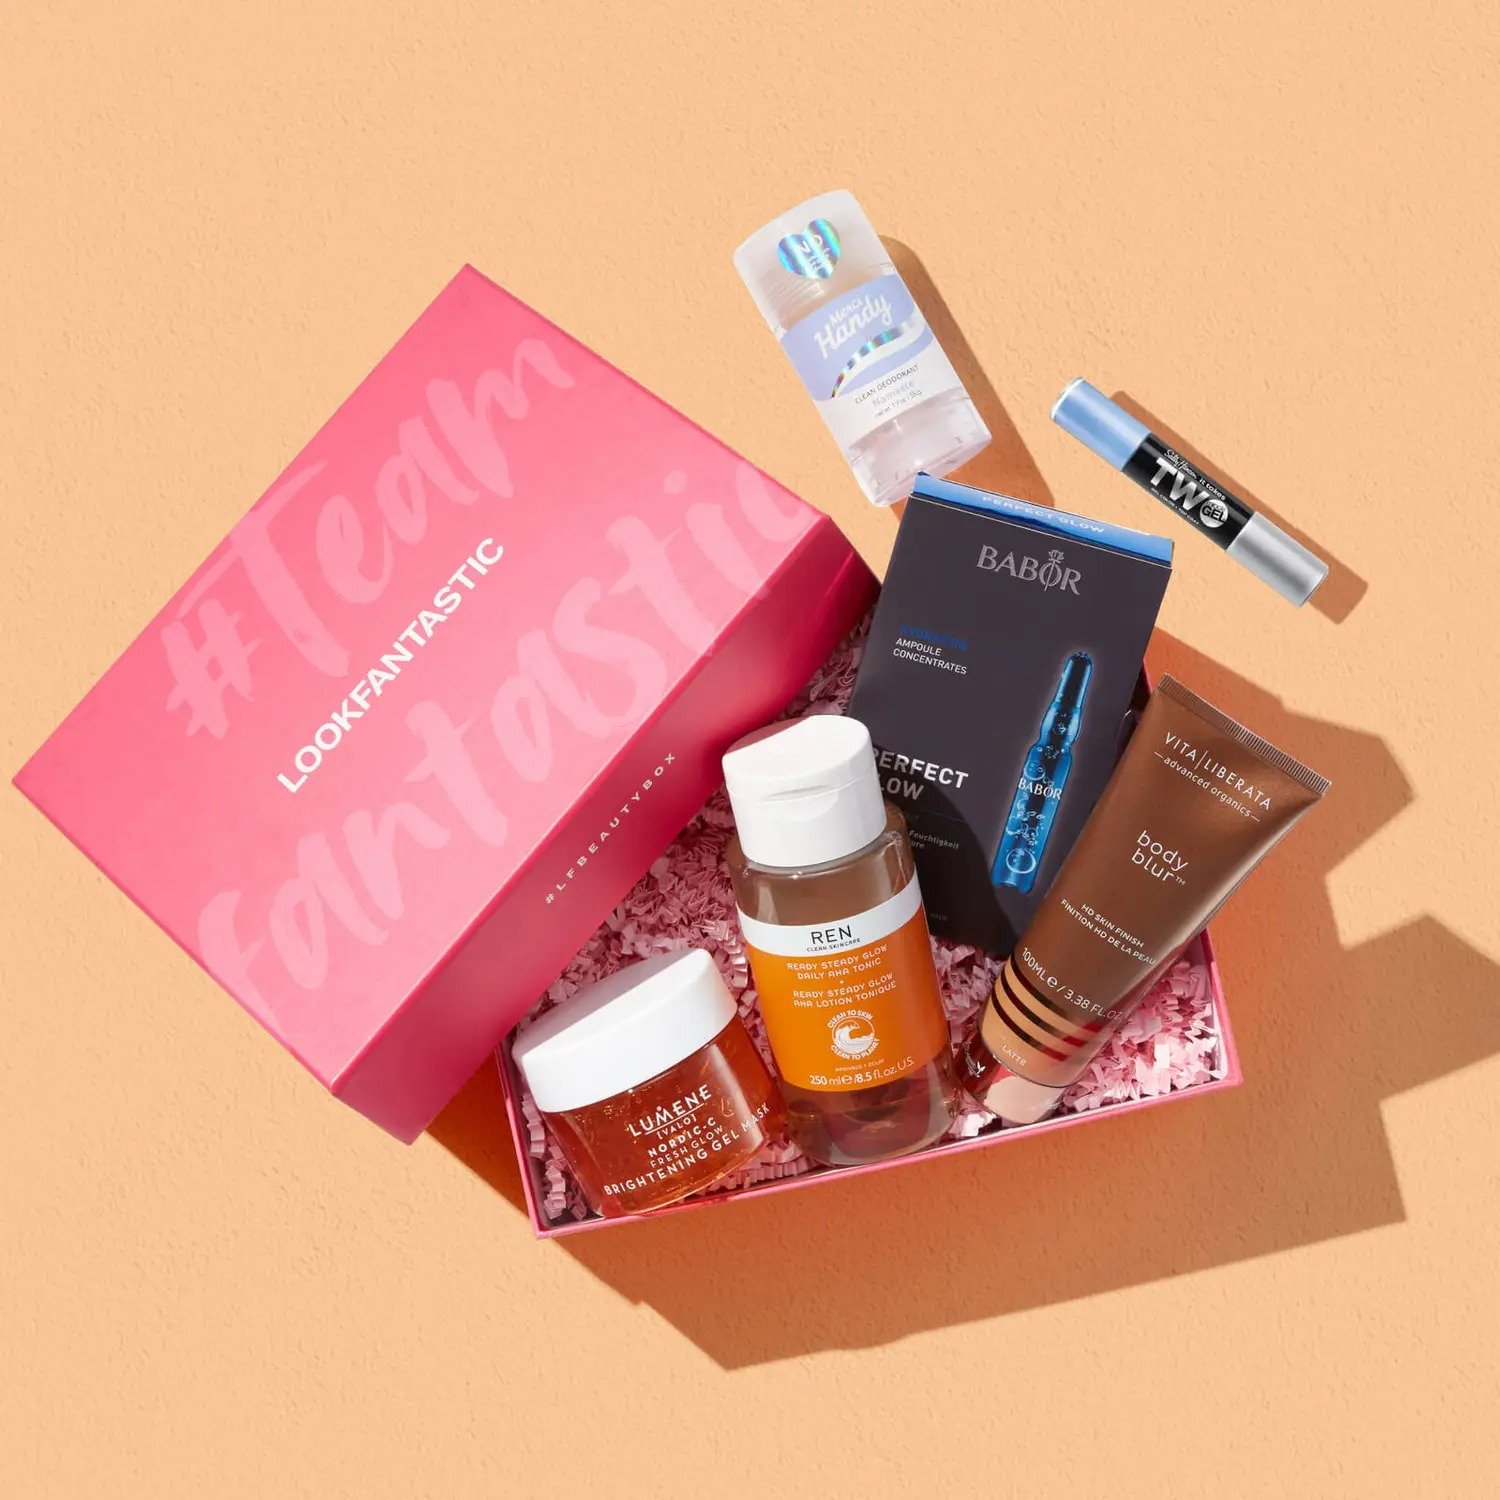 LookFantastic: Limited Edition Glow Edit Beauty Box Full Spoilers, Available Now